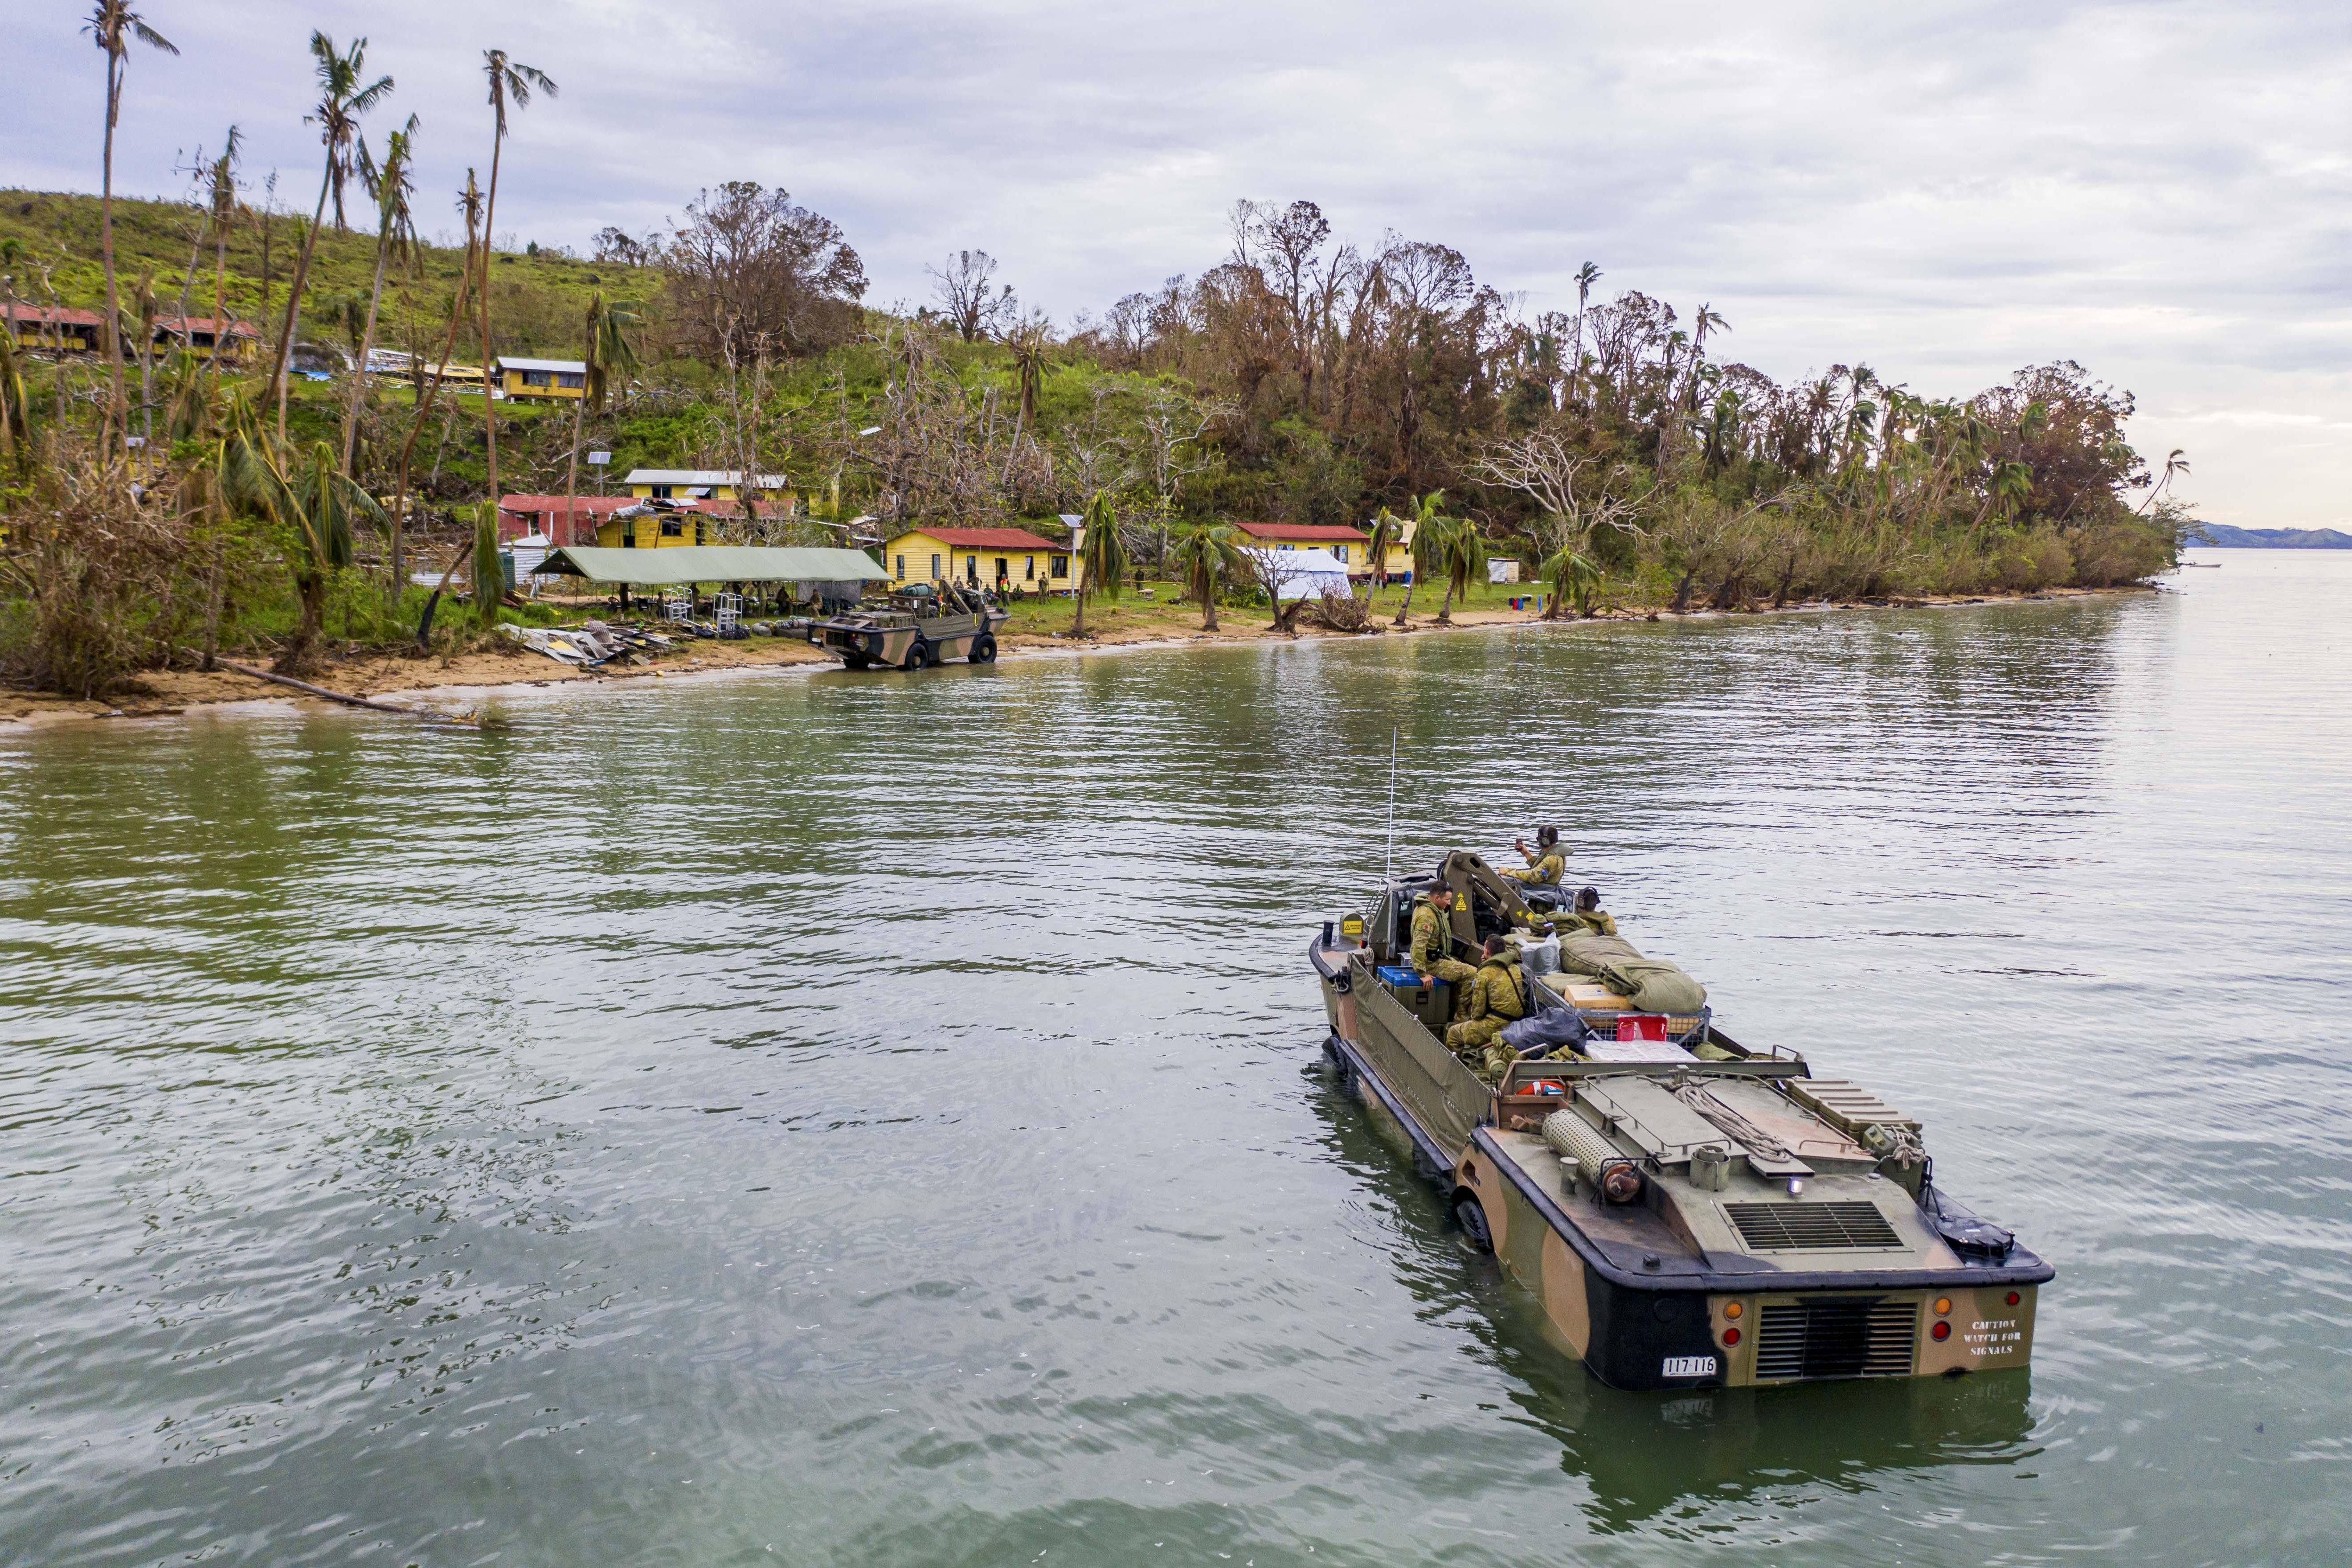 GALOA, FIJI - DECEMBER 30: In this handout provided by the Australian Department of Defence, Australian Army soldiers from the 10th Force Support Battalion drive a Light Amphibious Resupply Cargo 5 onto the island of Galoa, near Vanua Levu, in Fiji to drop off supplies required to repair buildings affected by Cyclone Yasa. On Thursday 24 December 20 over 600 Australian Defence Force (ADF) personnel on HMAS Adelaide deployed to Fiji to assist with the Fijian Government's disaster relief efforts in response to Tropical Cyclone Yasa. ADF elements are working with the Department of Foreign Affairs and Trade (DFAT) to support the RFMF to provide assistance to thousands of Fijians, including many from remote islands whose homes, schools and other local infrastructure were damaged or destroyed by the category 5 cyclone. (Photo by CPL Dustin Anderson/Australian Department of Defence via Getty Images )